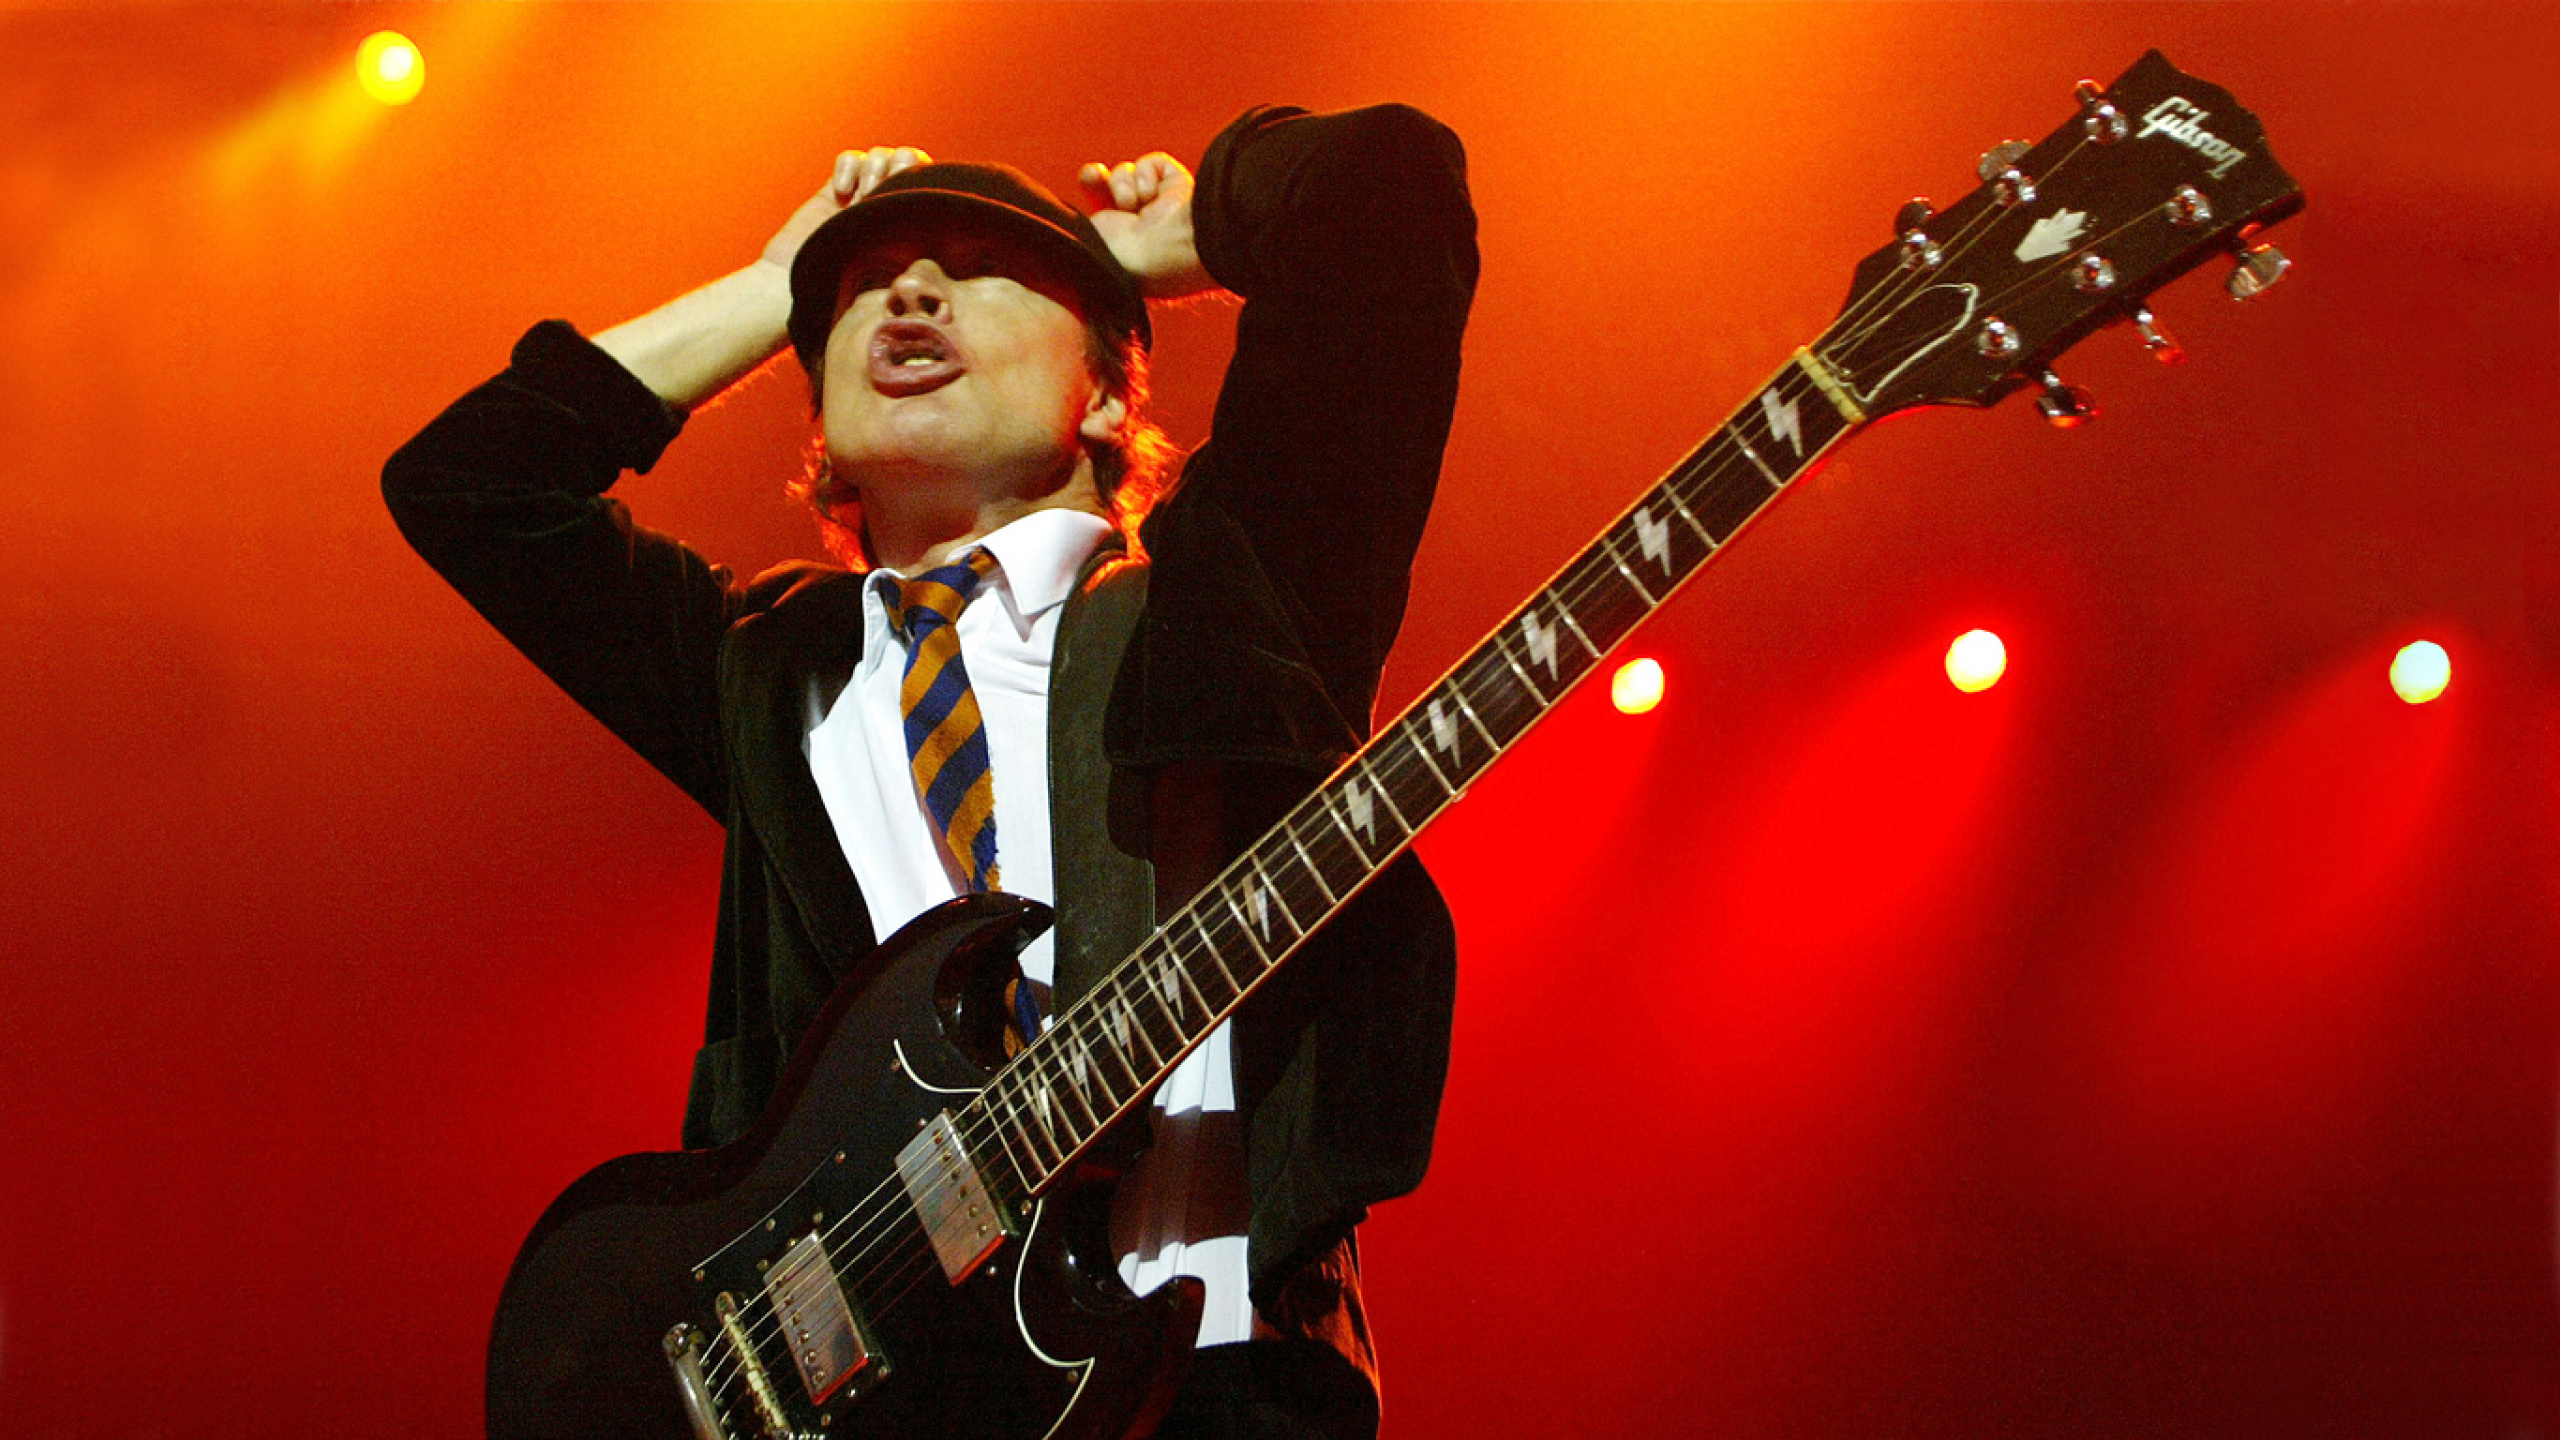 Angus Young, AC/DC guitarist, Ambient light photography, Music photography, 2560x1440 HD Desktop